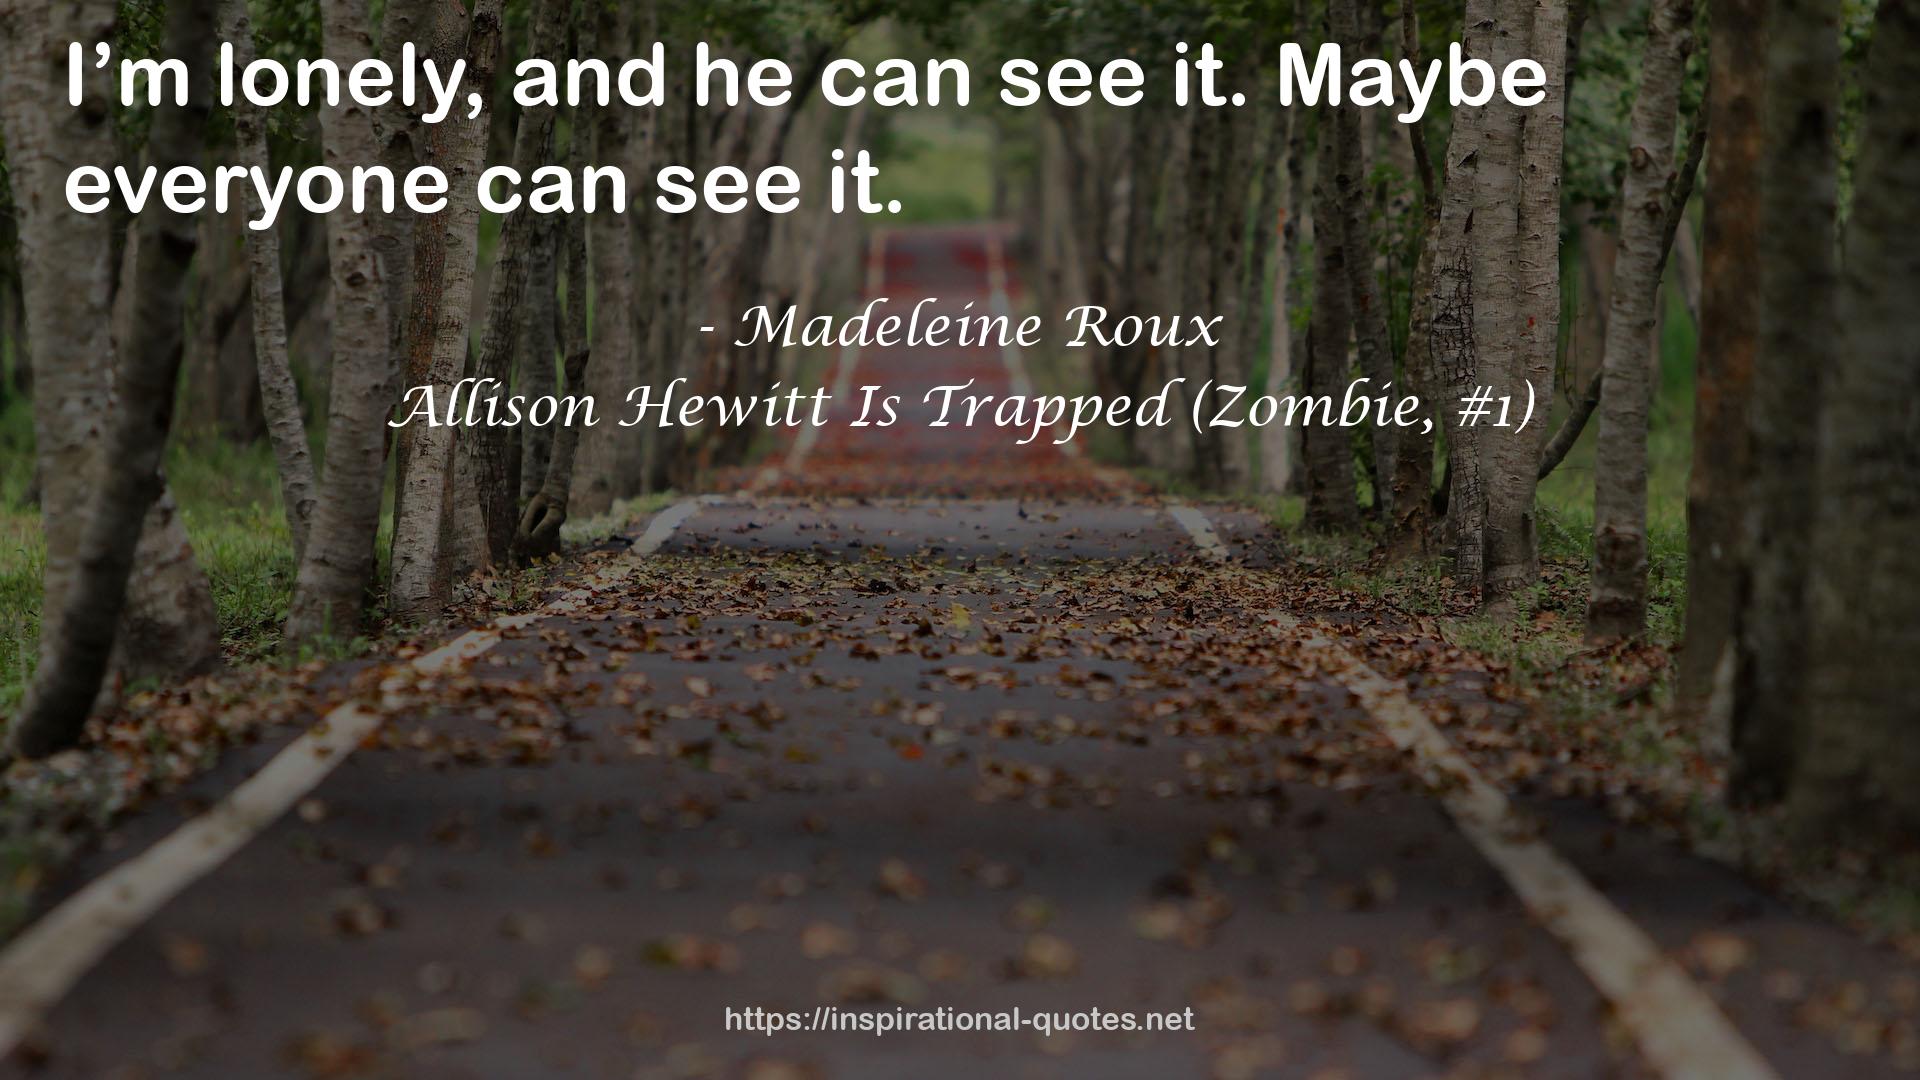 Allison Hewitt Is Trapped (Zombie, #1) QUOTES